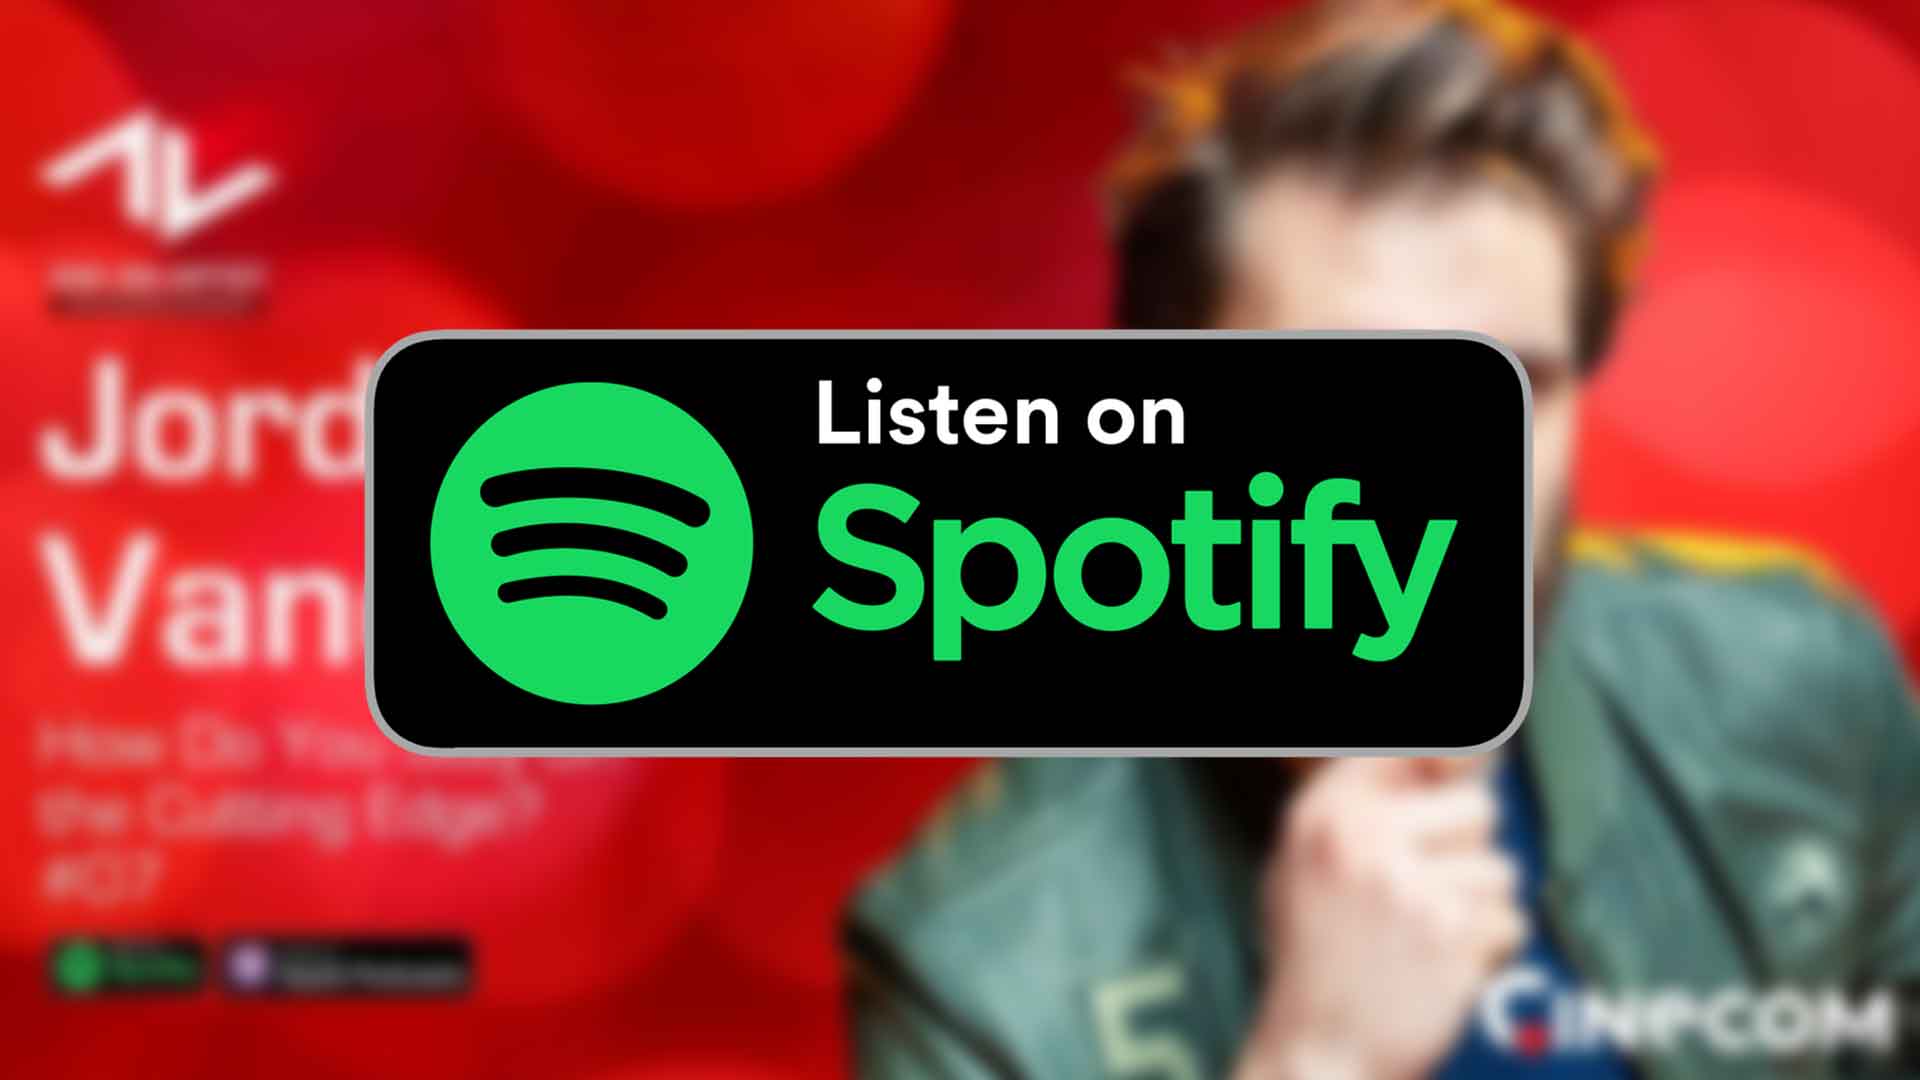 Listen to episode 7 of Ask An Artist on Spotify.